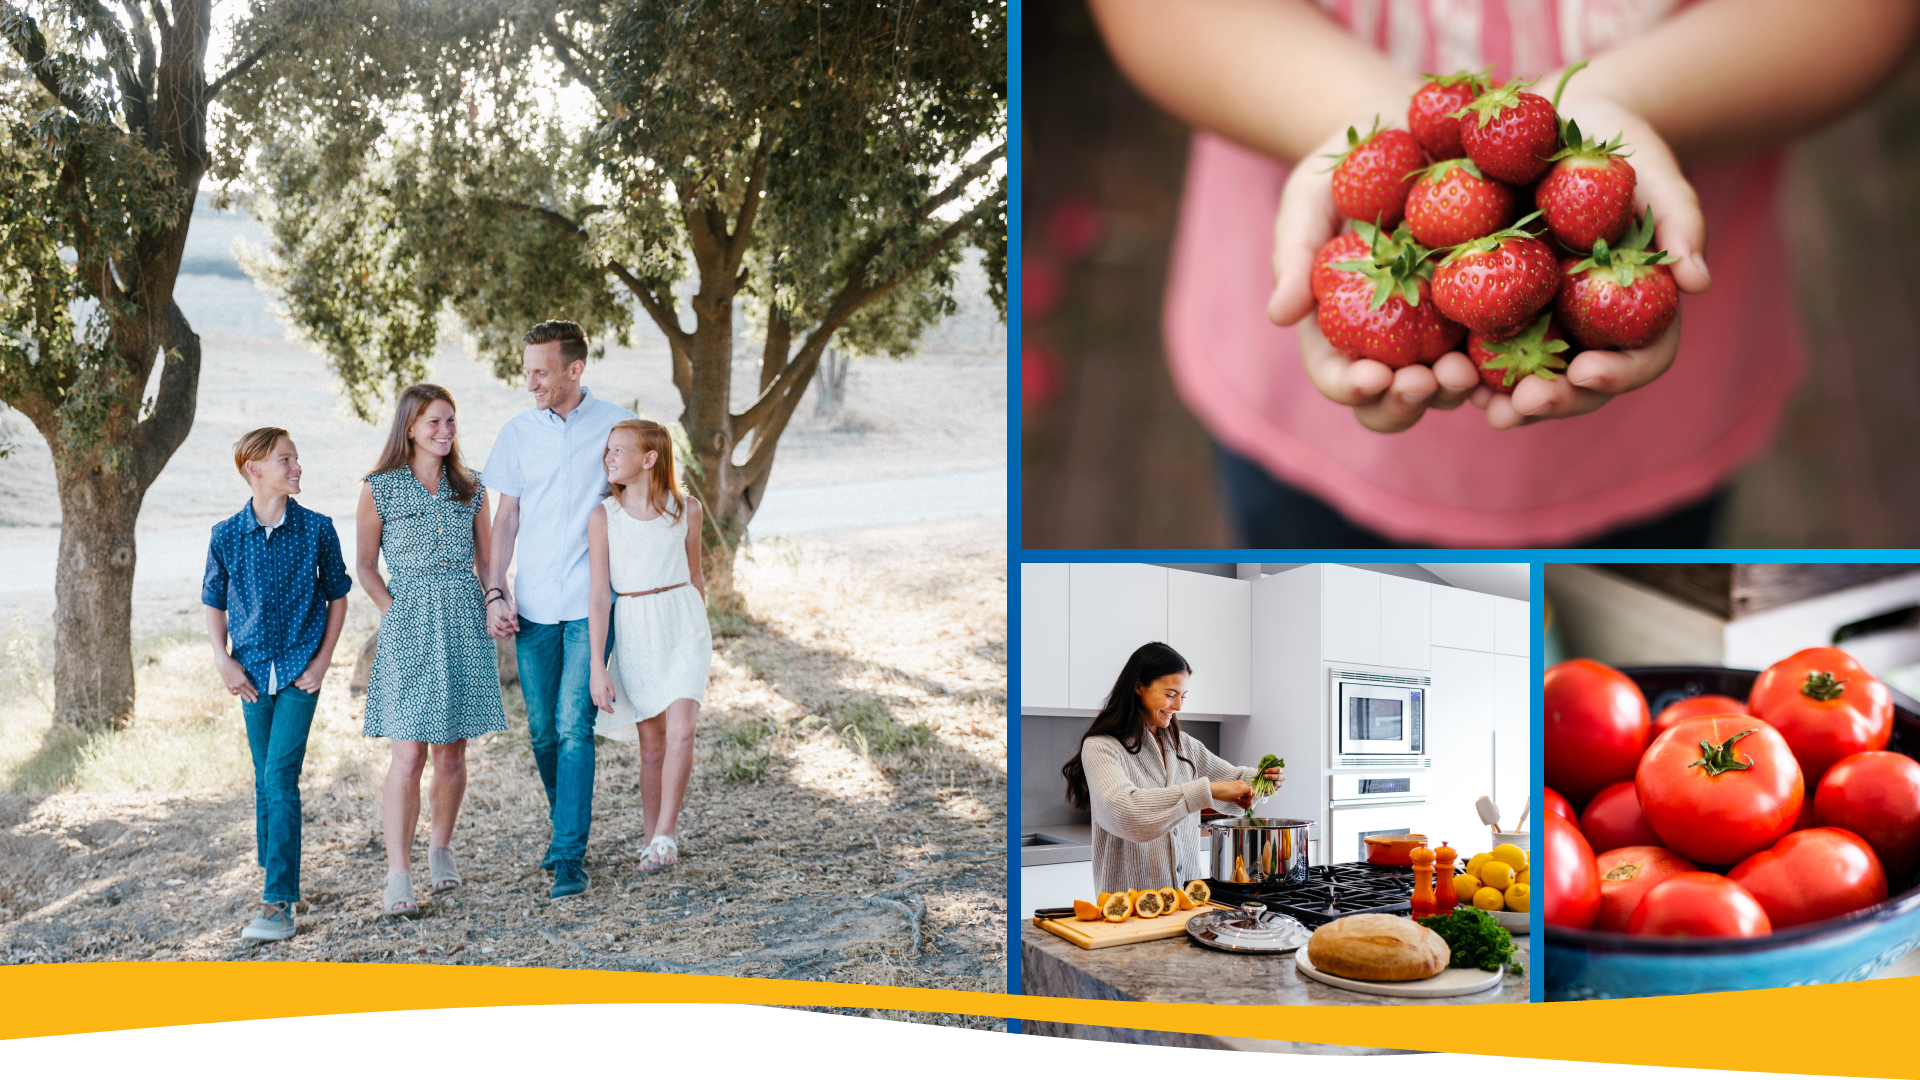 Flyer header with four images. Family walking in the woods, hands holding strawberries, woman cooking, and a bowl of tomatoes